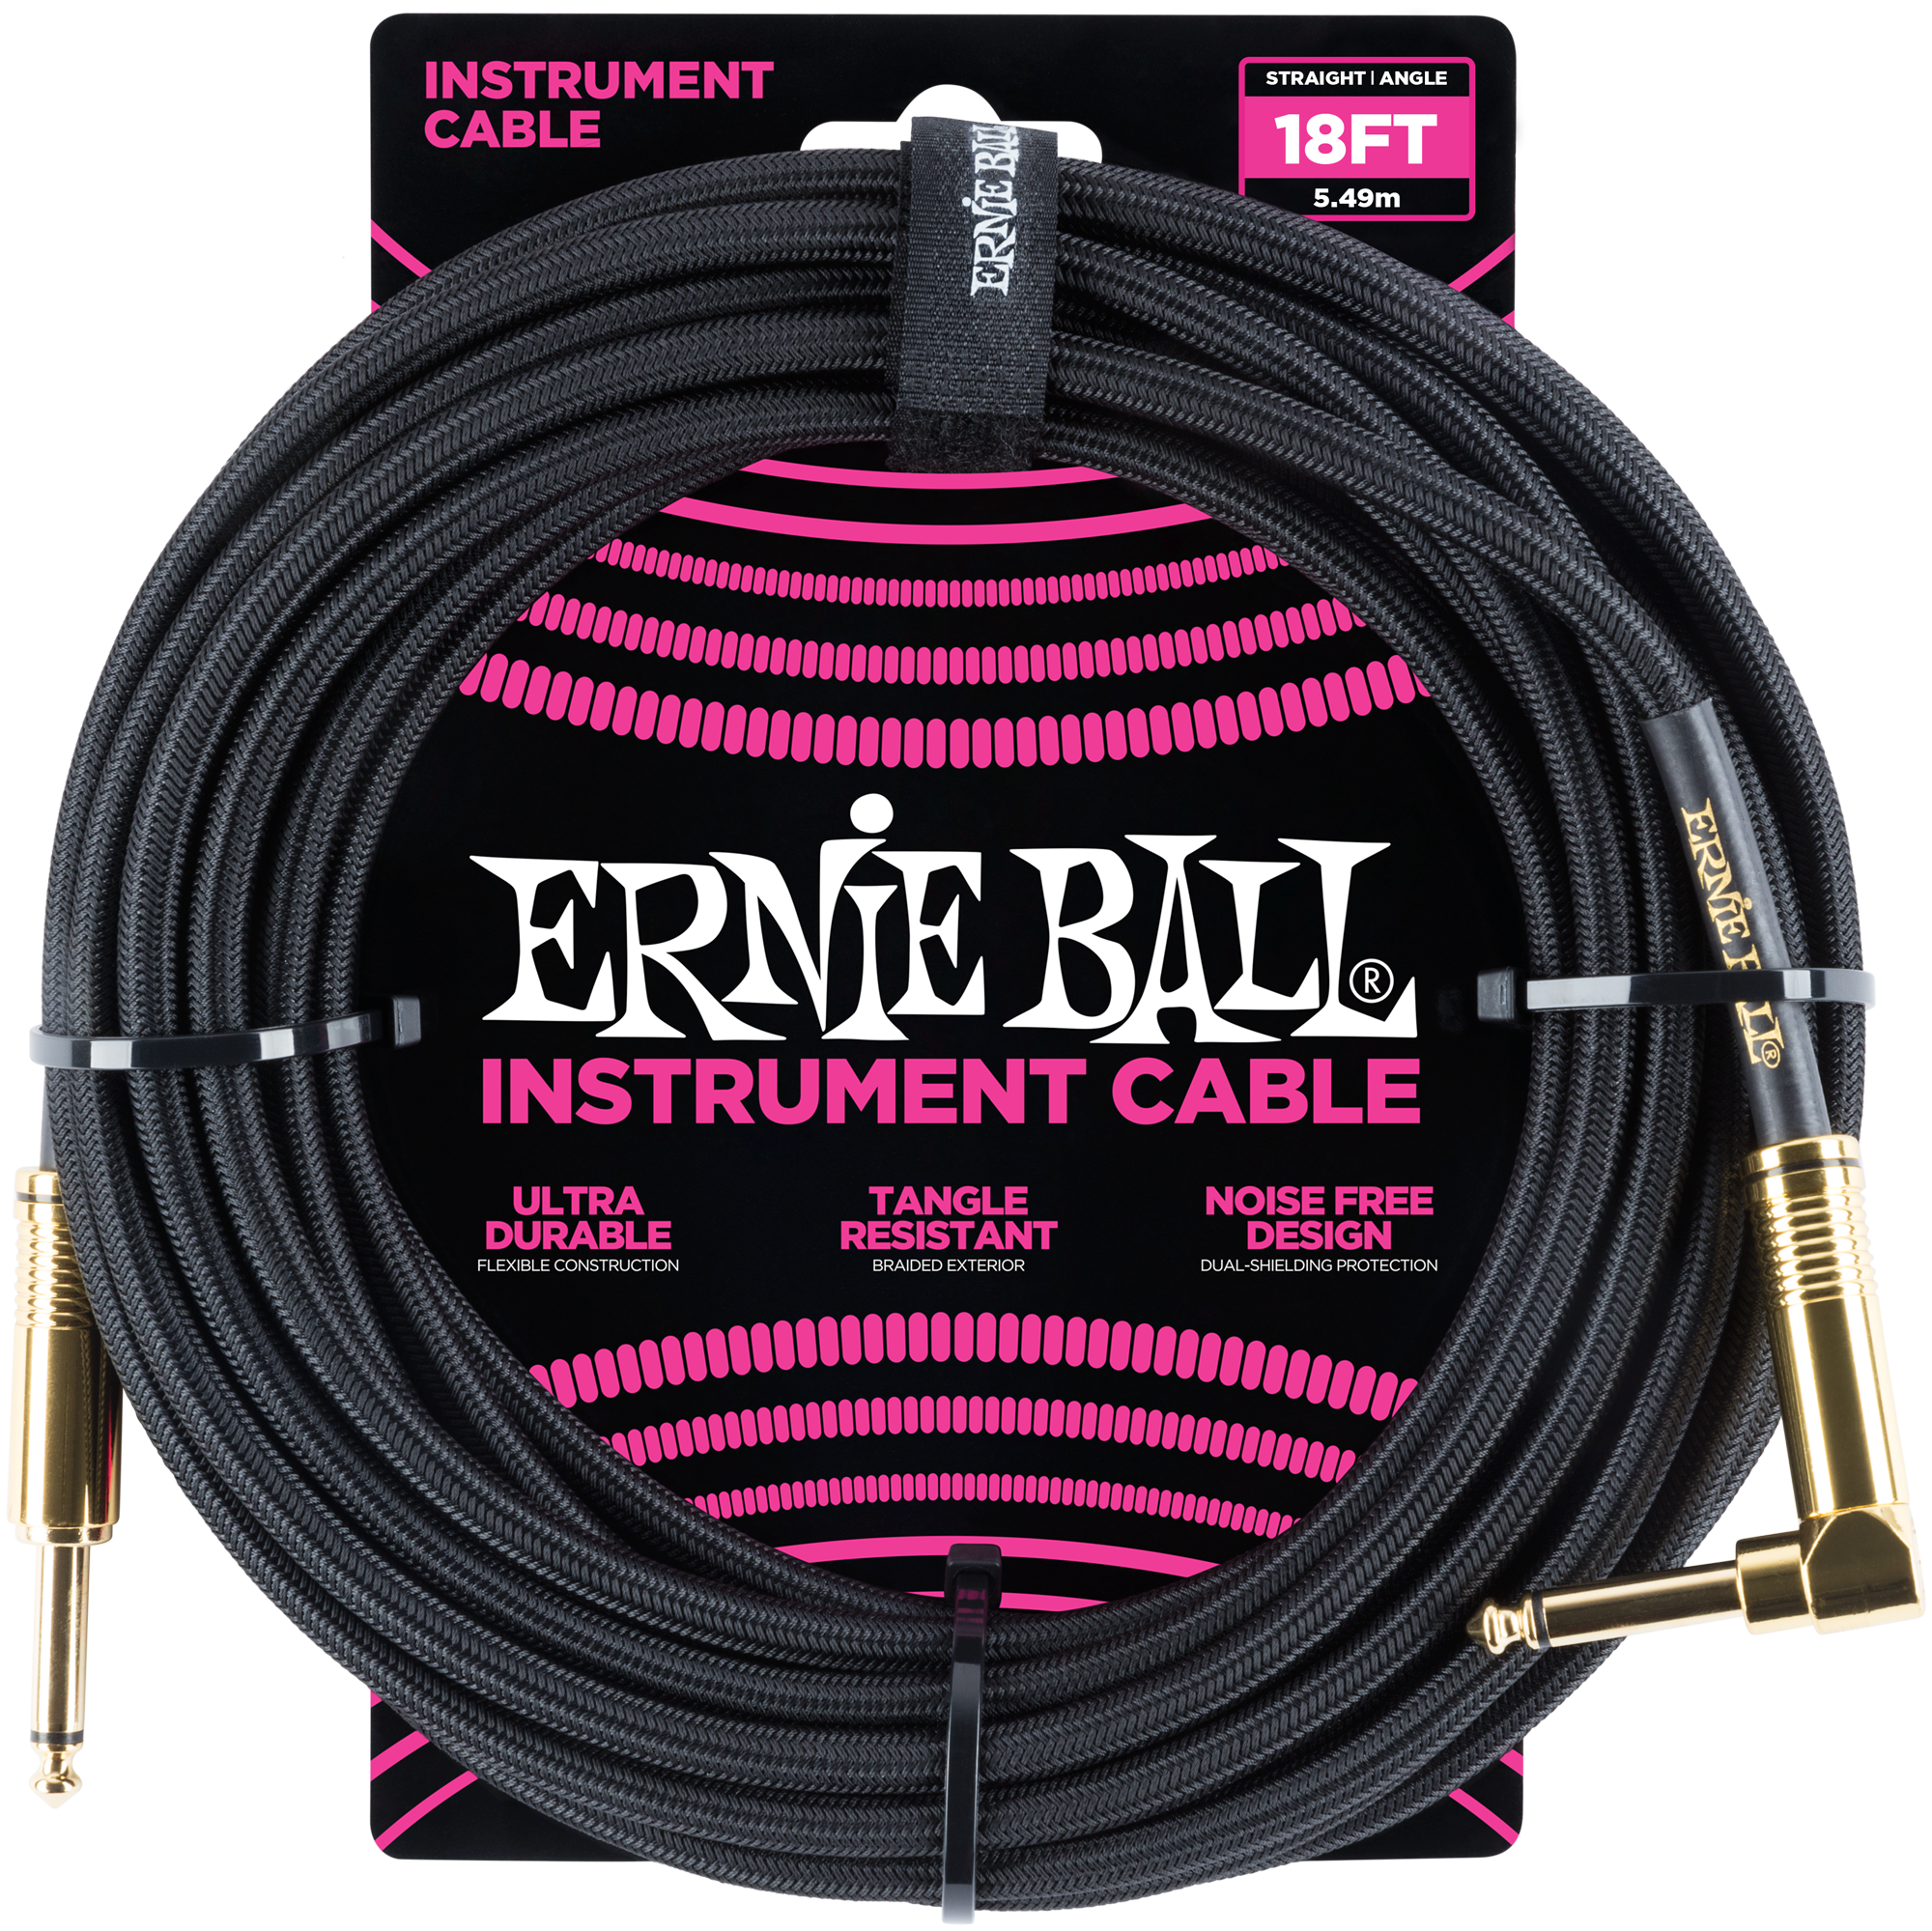 Ernie Ball Instrument Cable Black 6